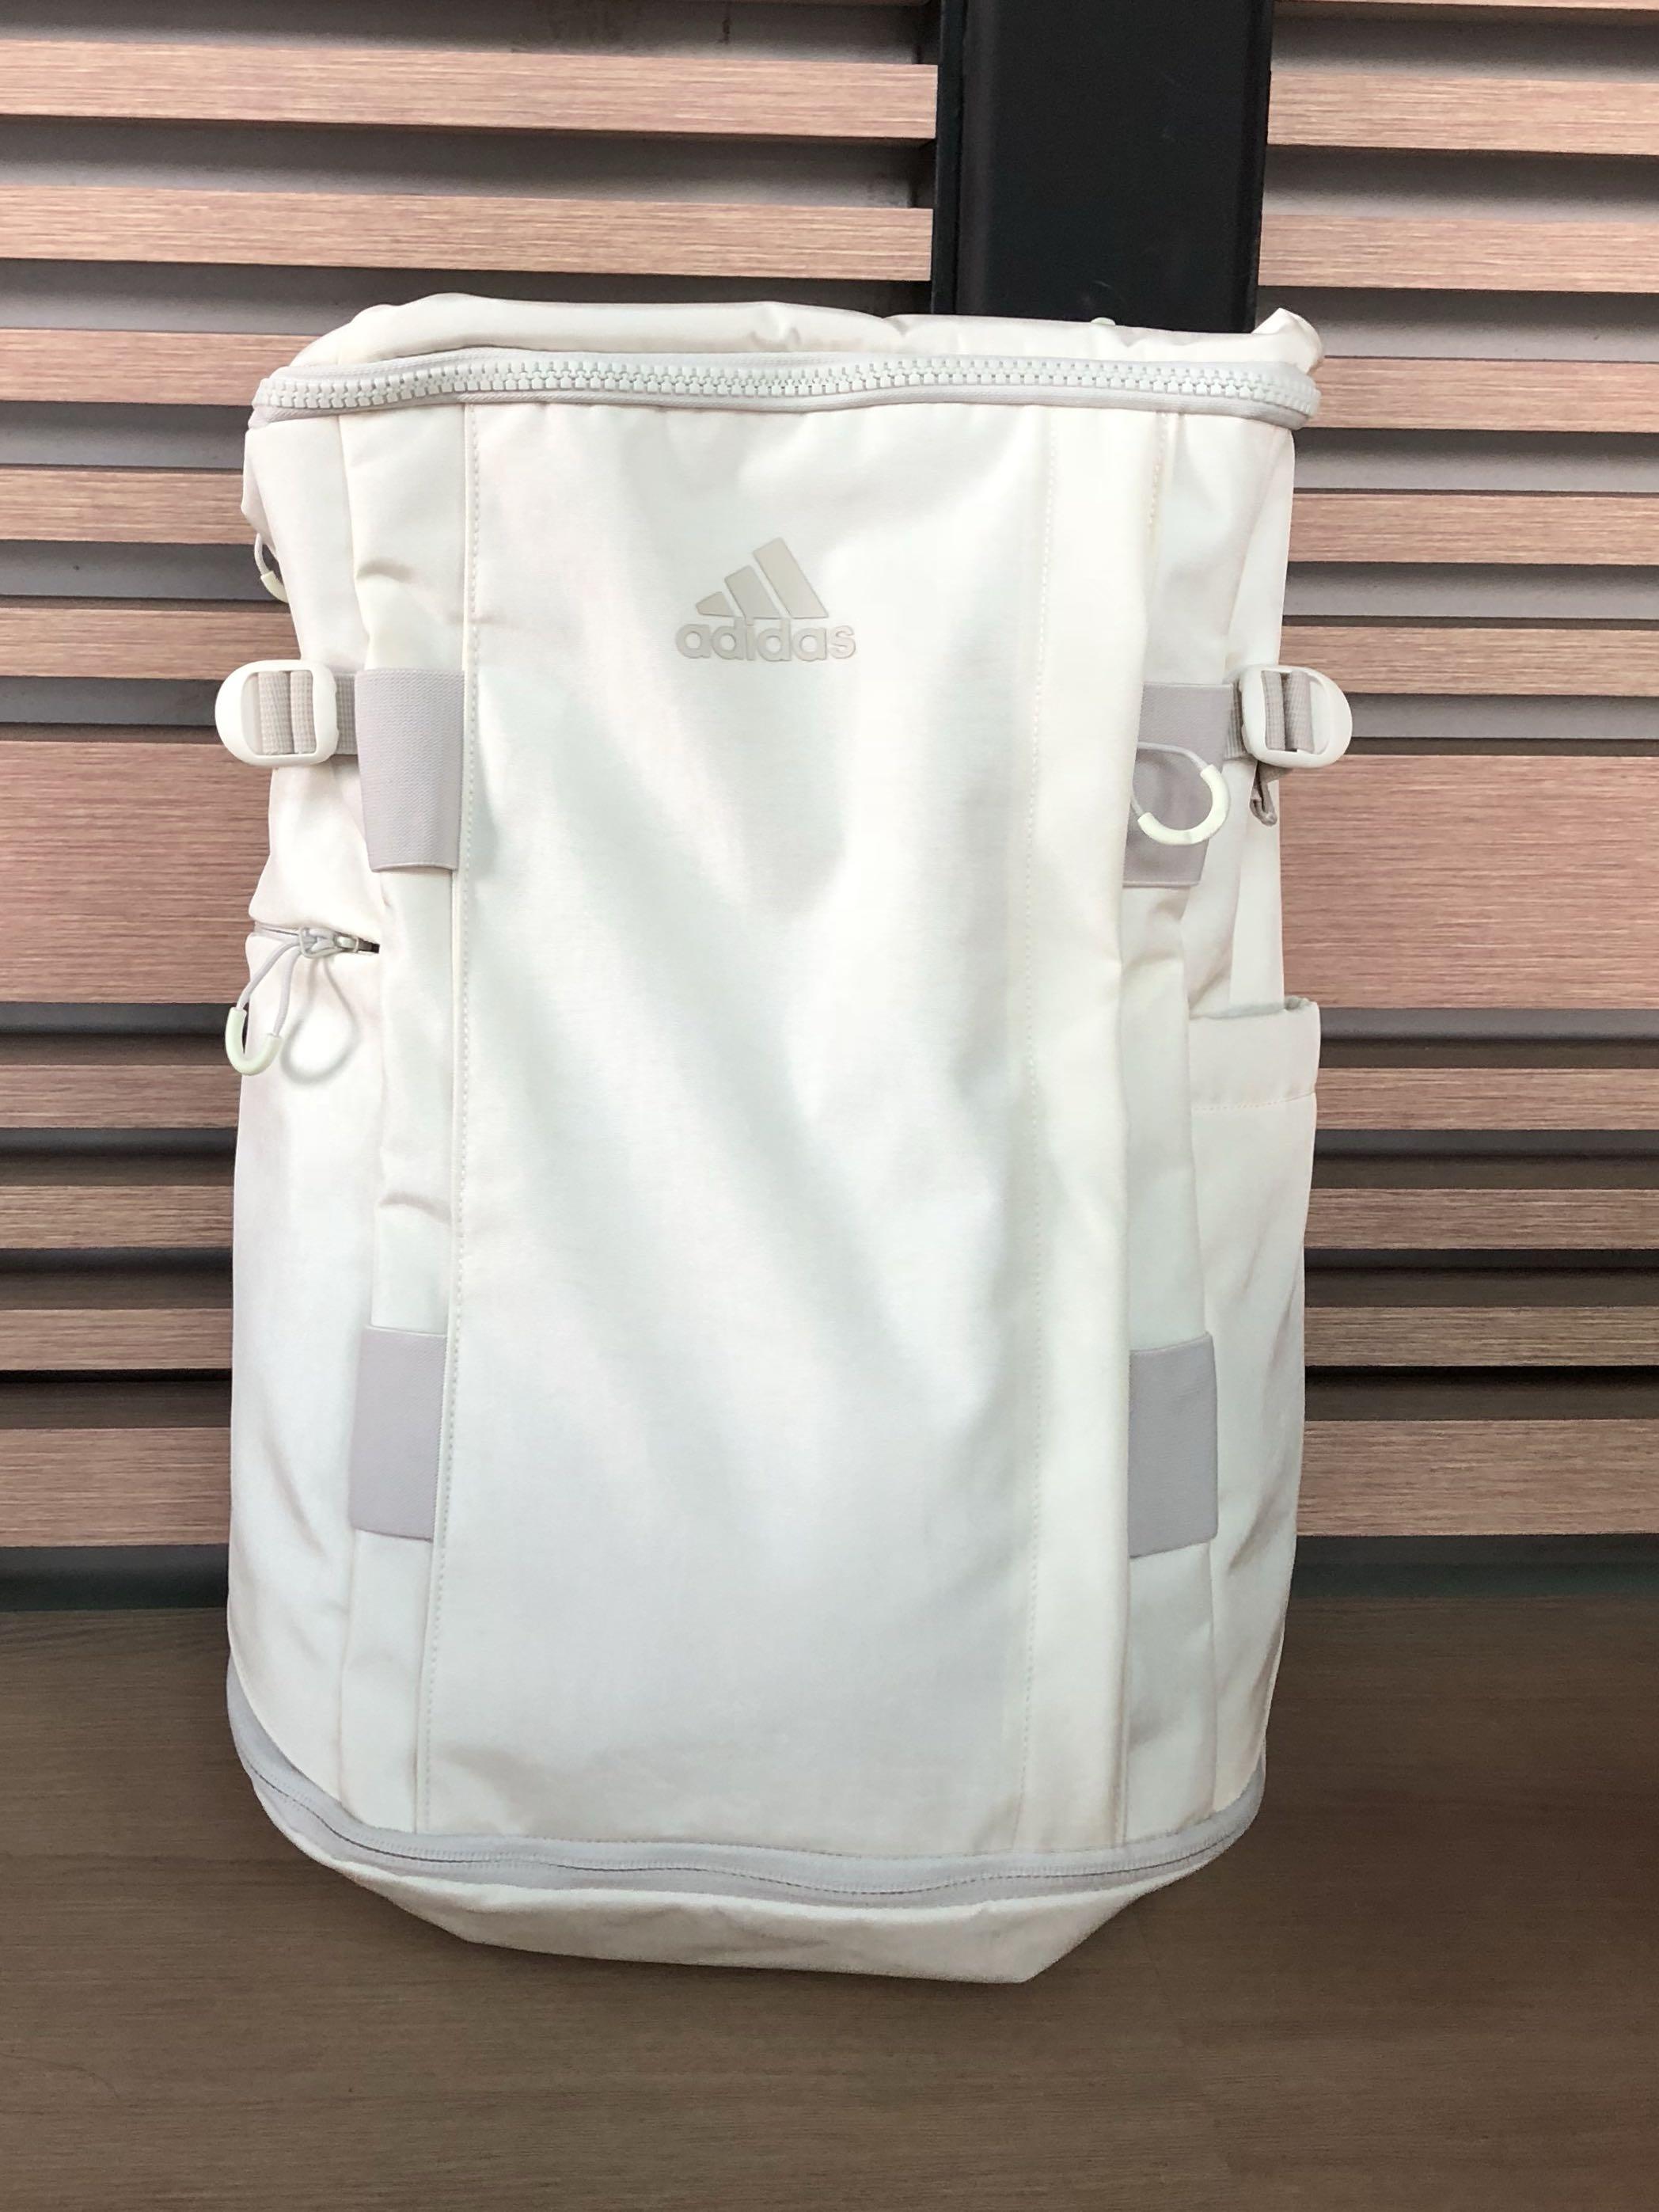 Adidas Ops Backpack 30l Free Delivery Off64 Welcome To Buy